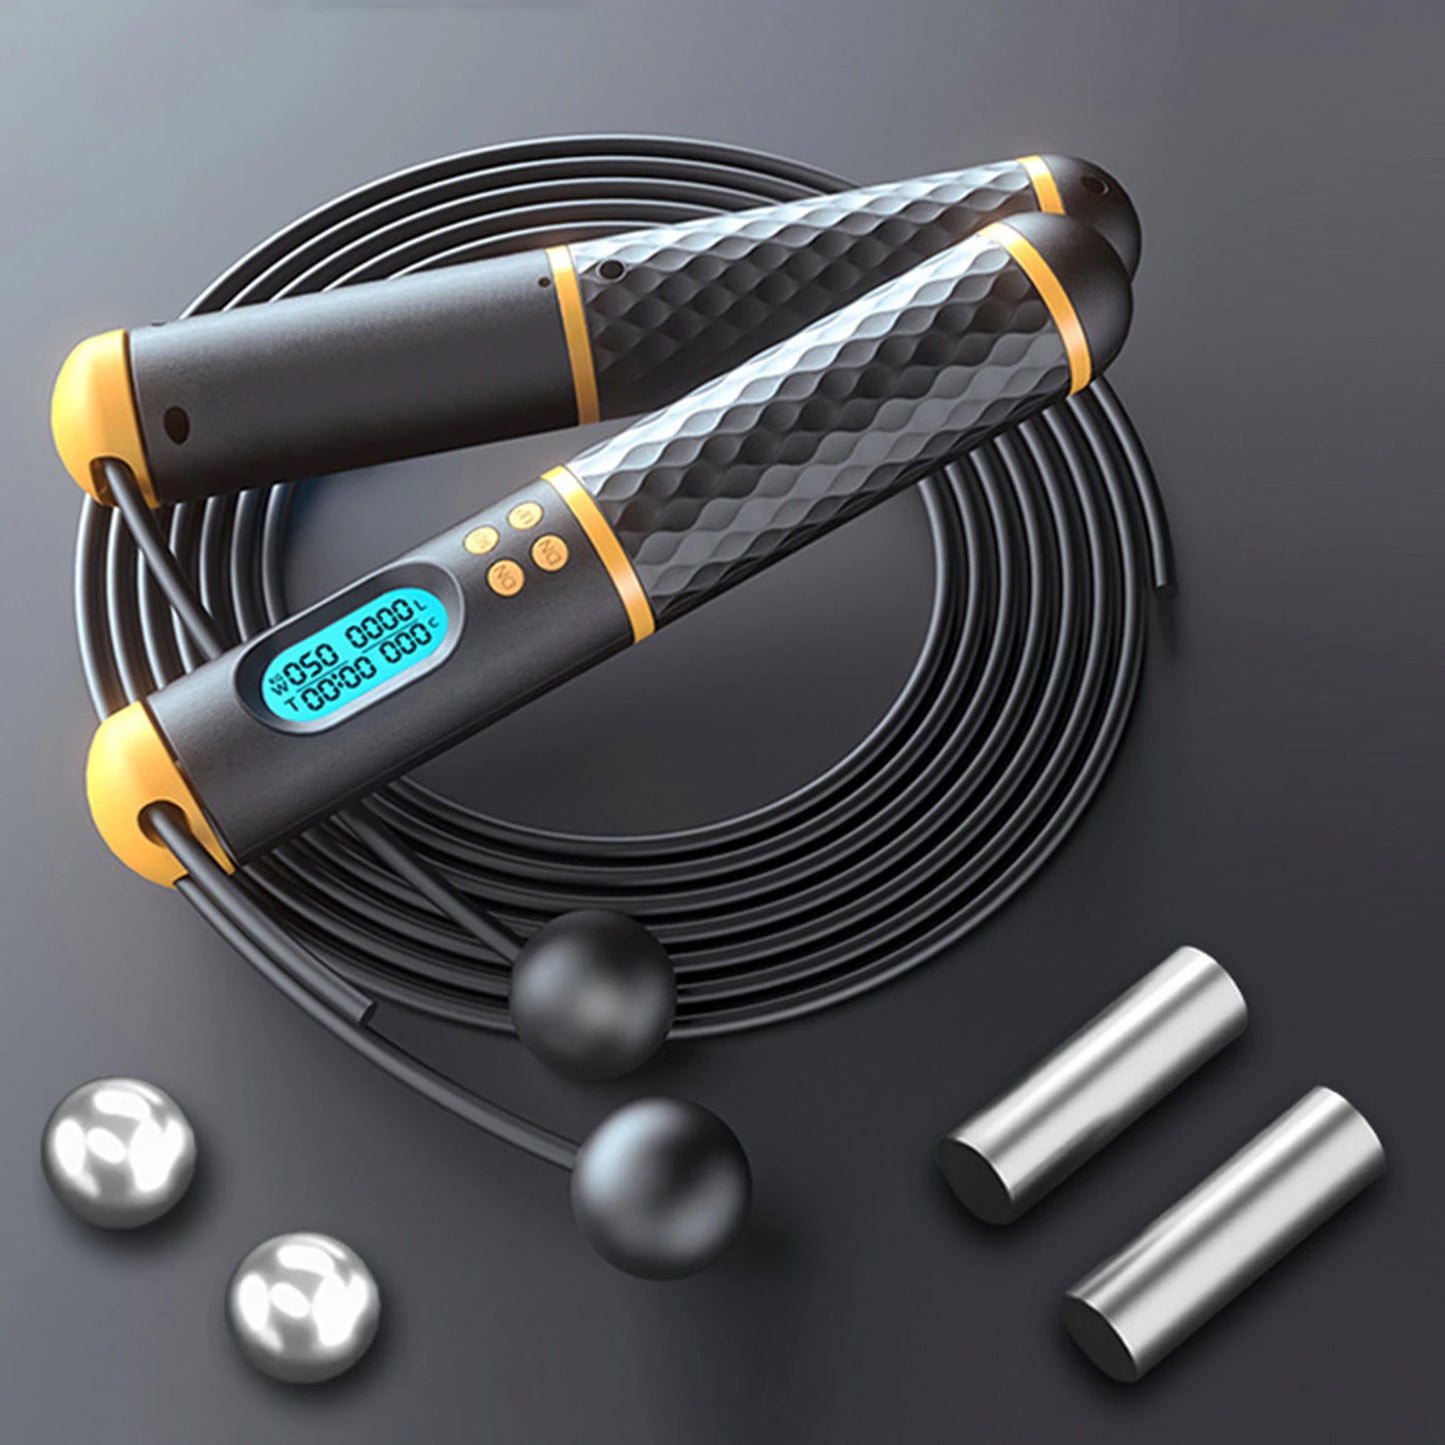 2-In-1 Jump Rope Intelligent Cordless Skipping Rope Digital Counter Gym Rope Weight Loss Training Speed Rope for Fitness Workout